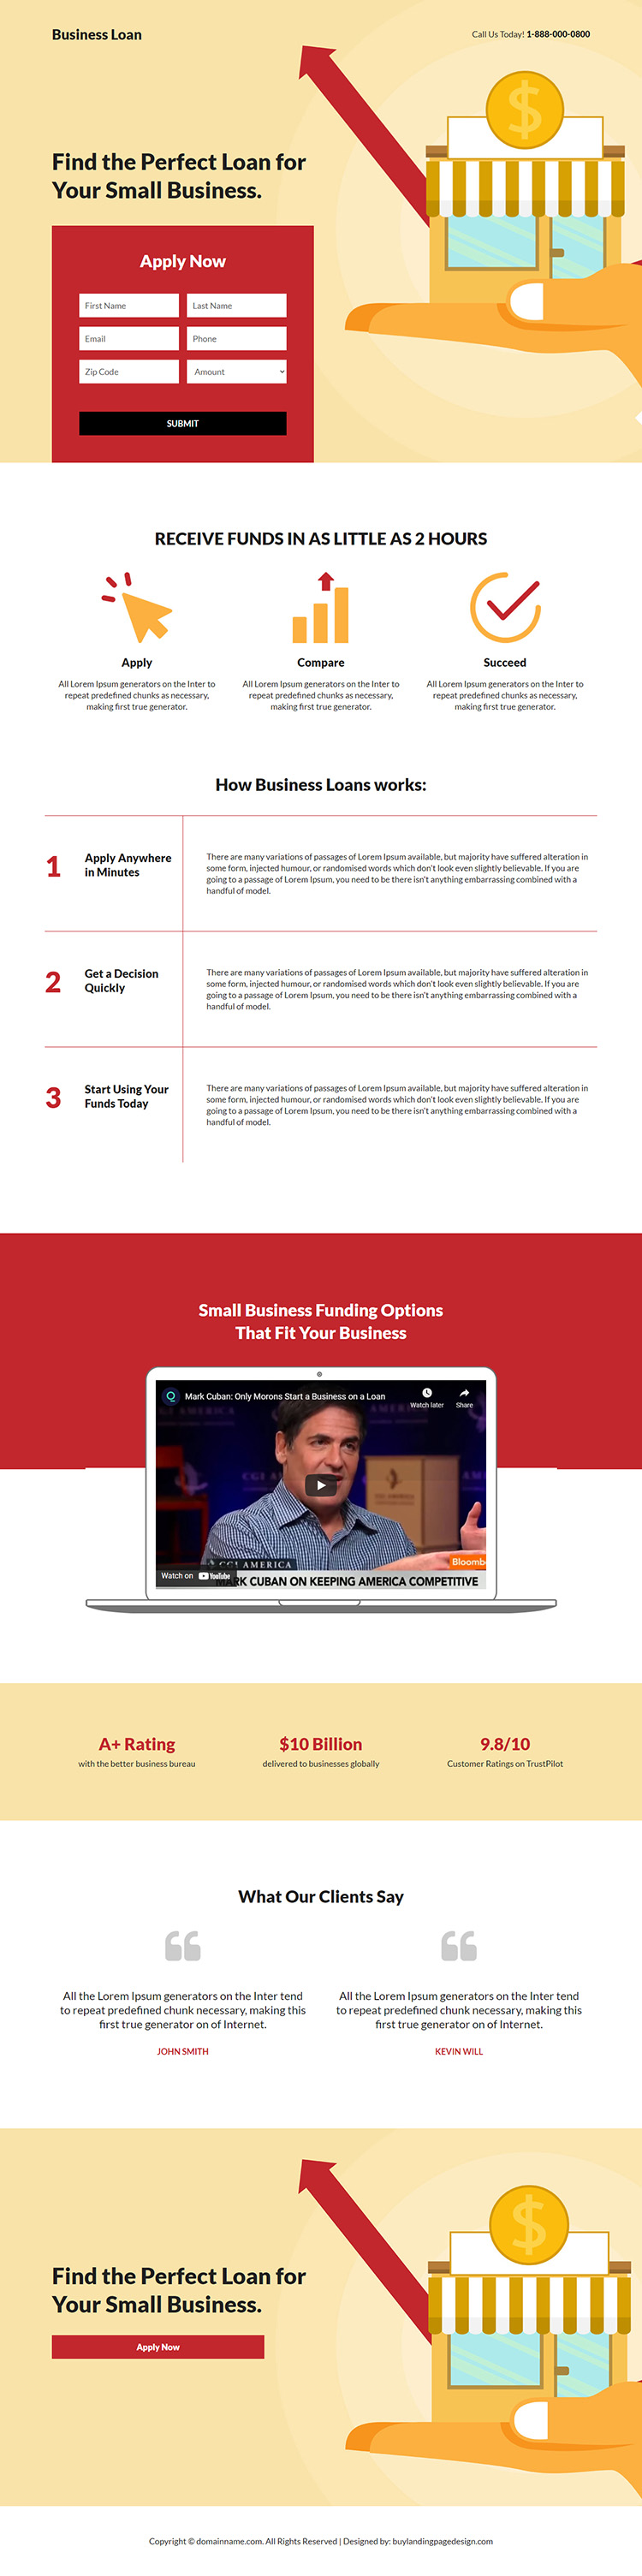 small business funding responsive landing page design